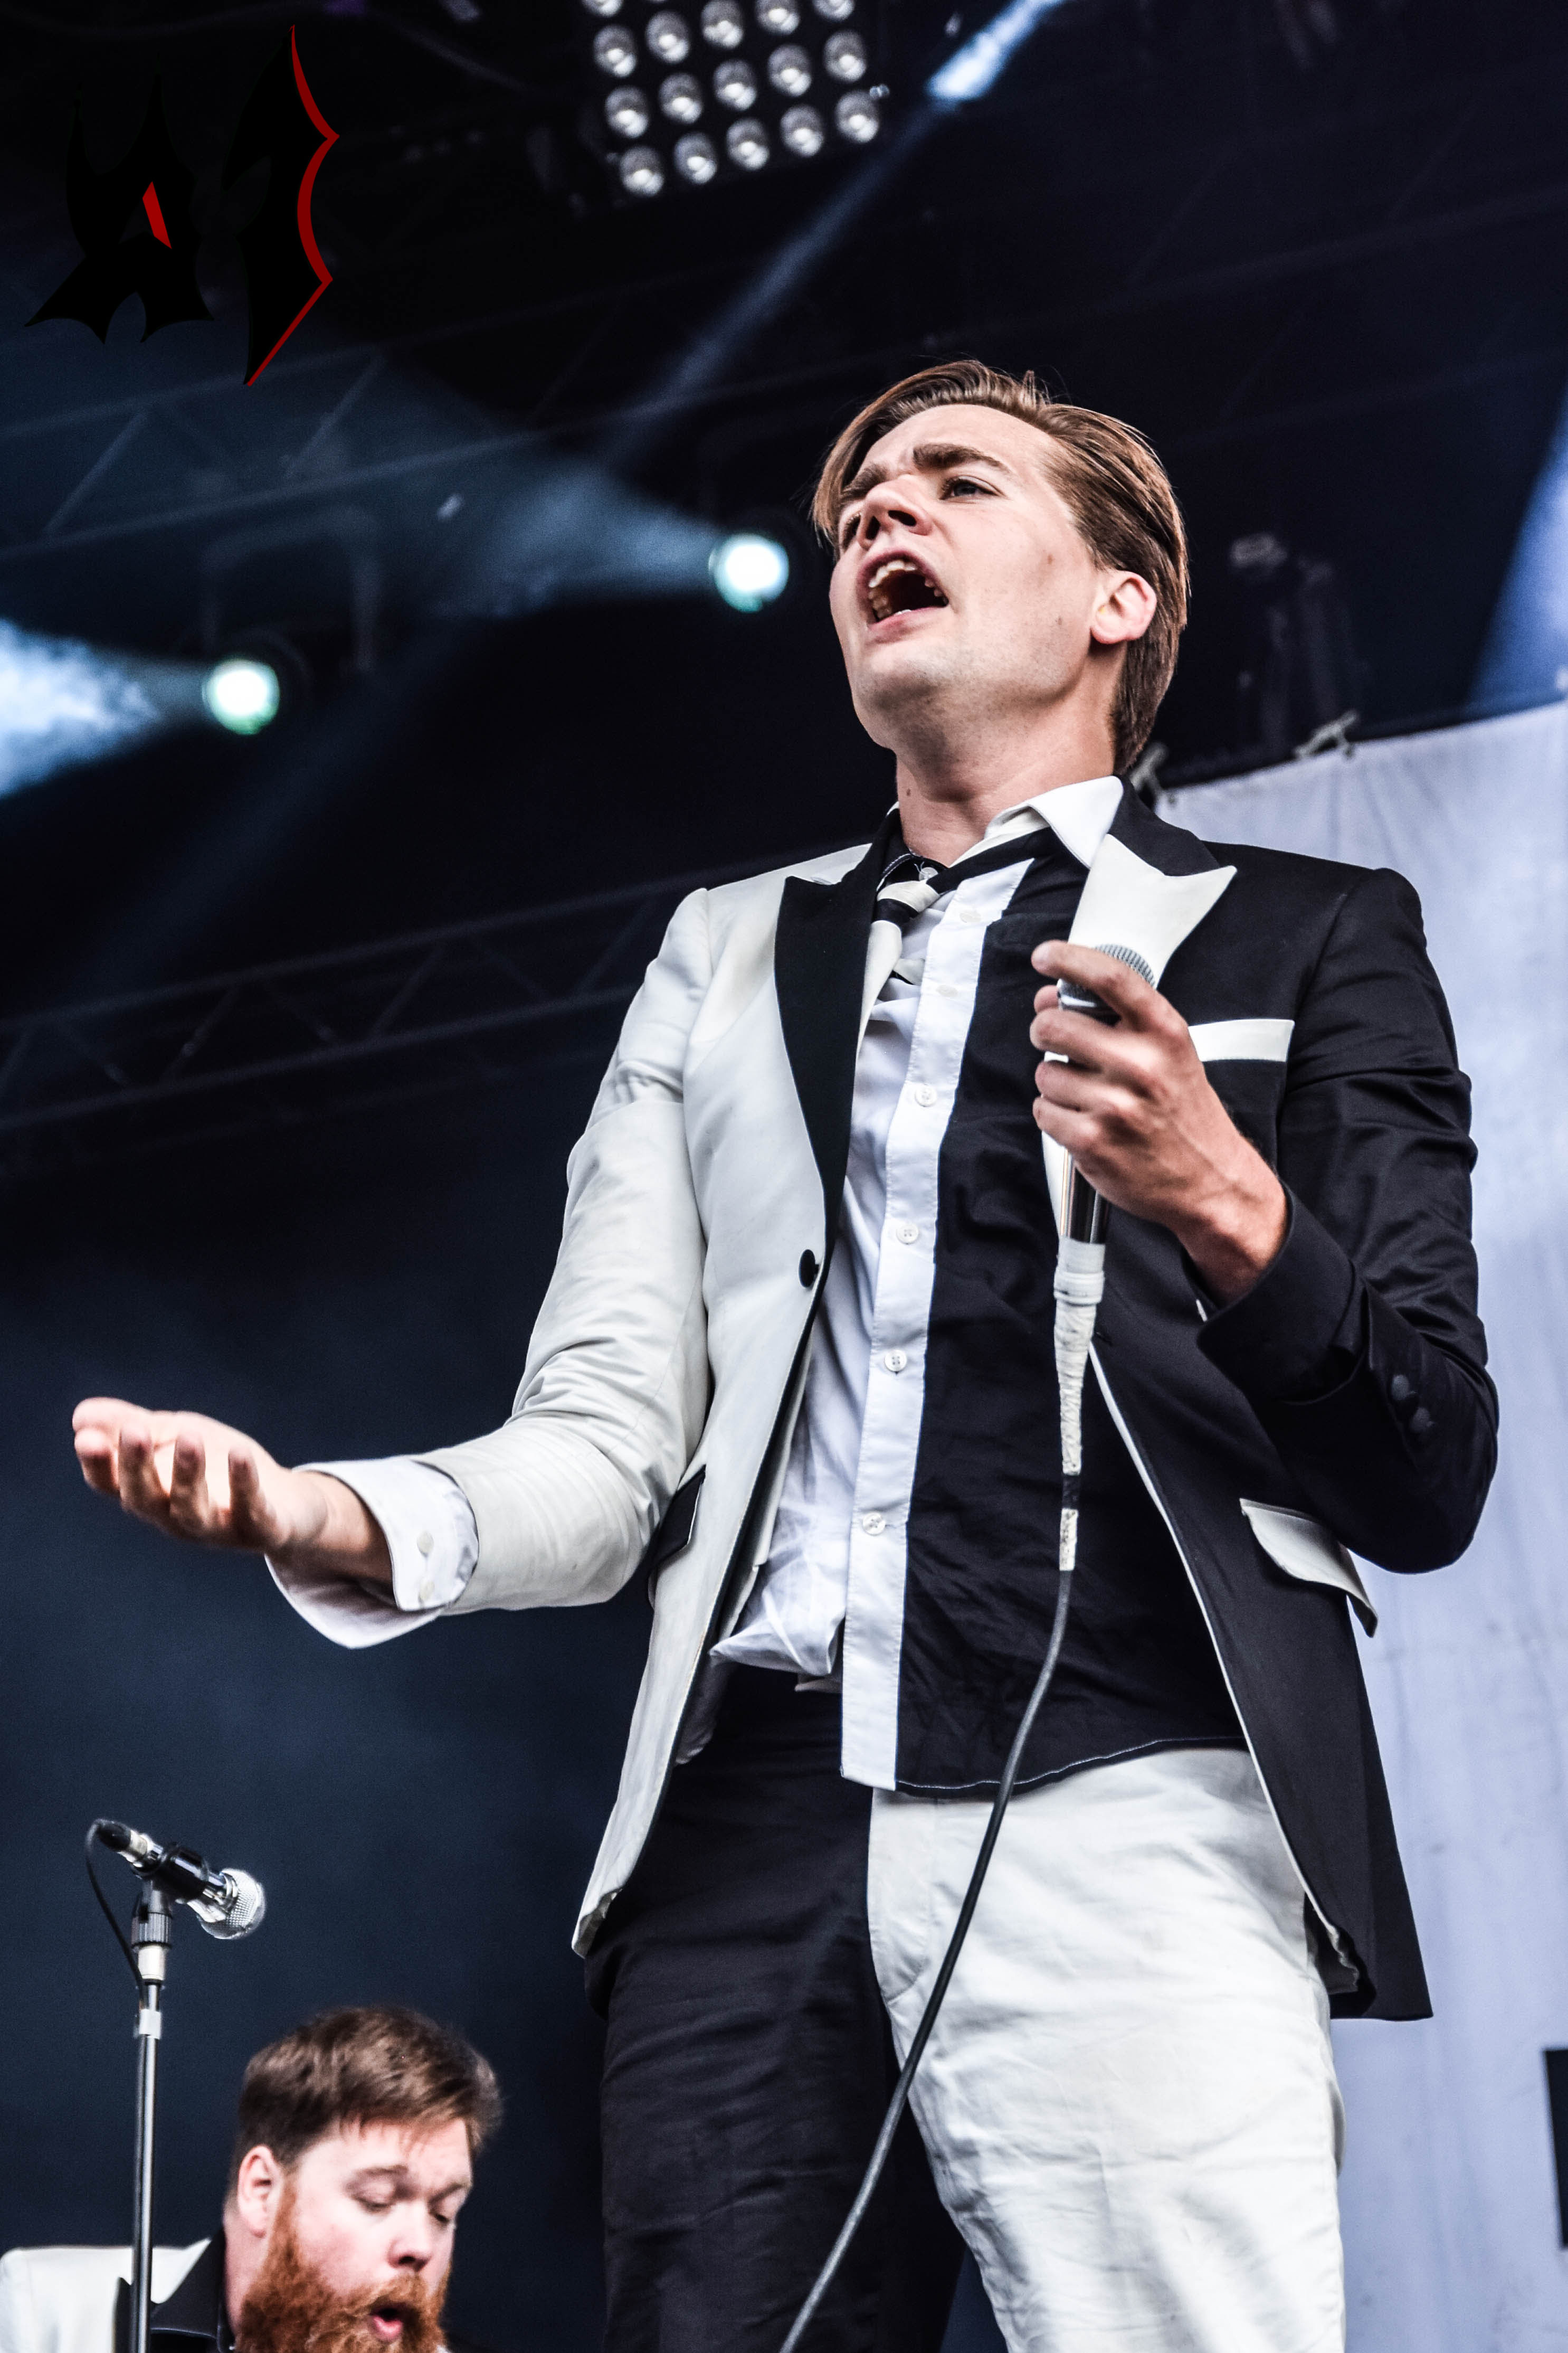 Donwload 2018 – Day 3 - The Hives 30